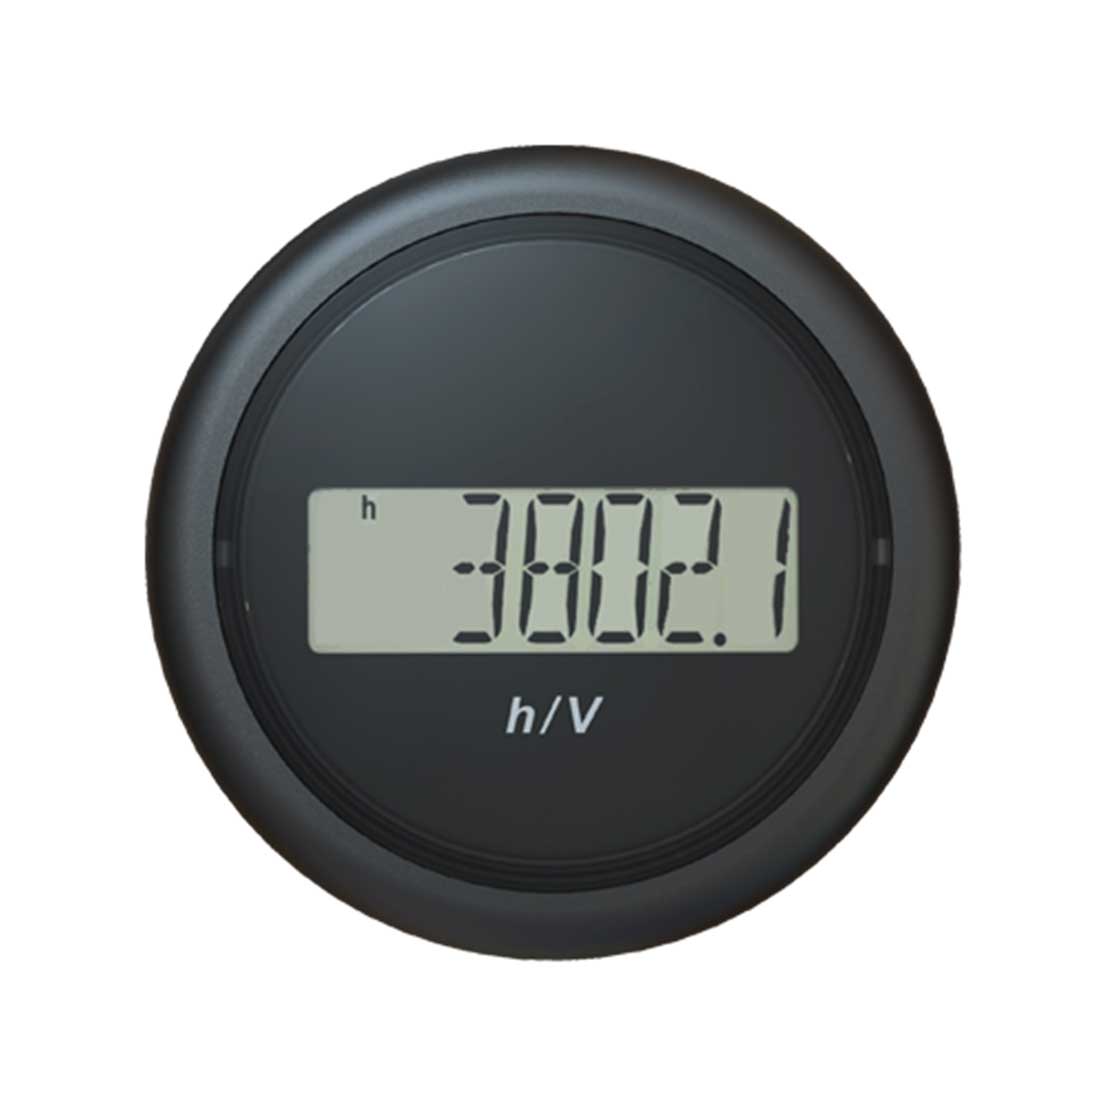 B00005302 - Veratron VL Engine Hour Counter + Voltmeter With LCD Black